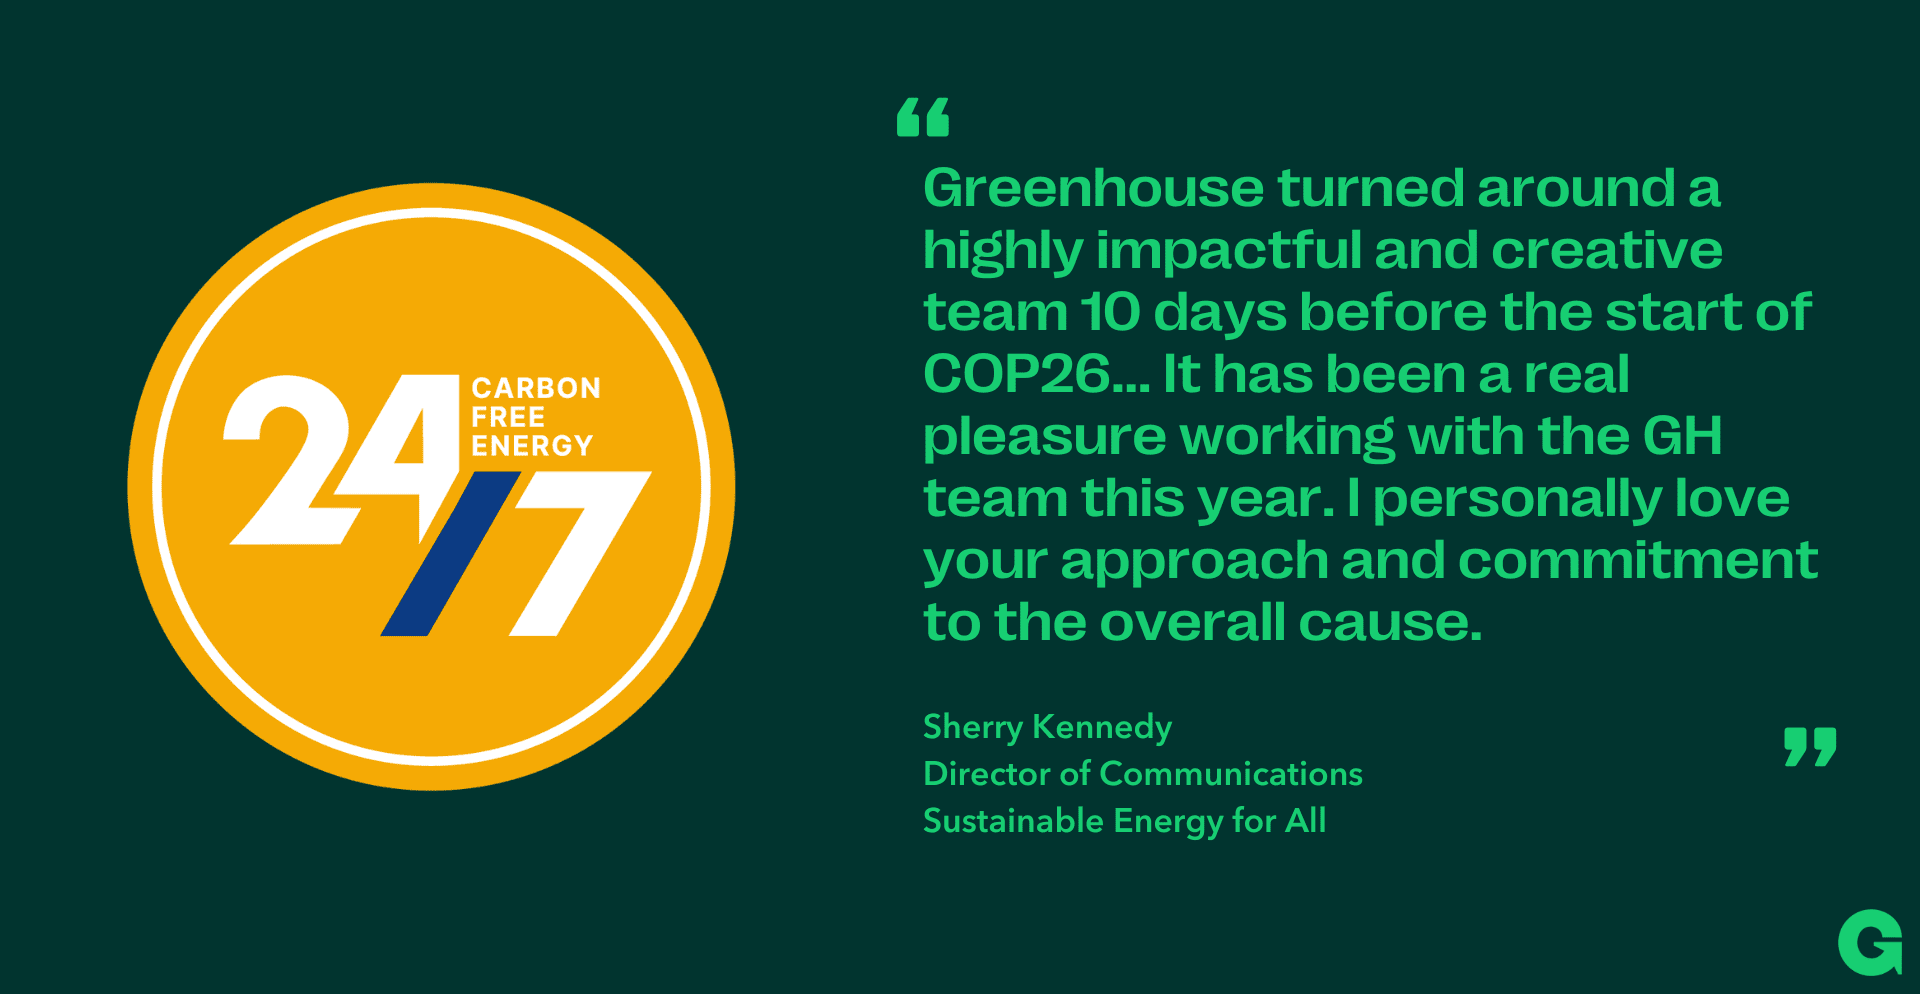 Quote by Sherry Kennedy, Director of Communications at Sustainable Energy for All